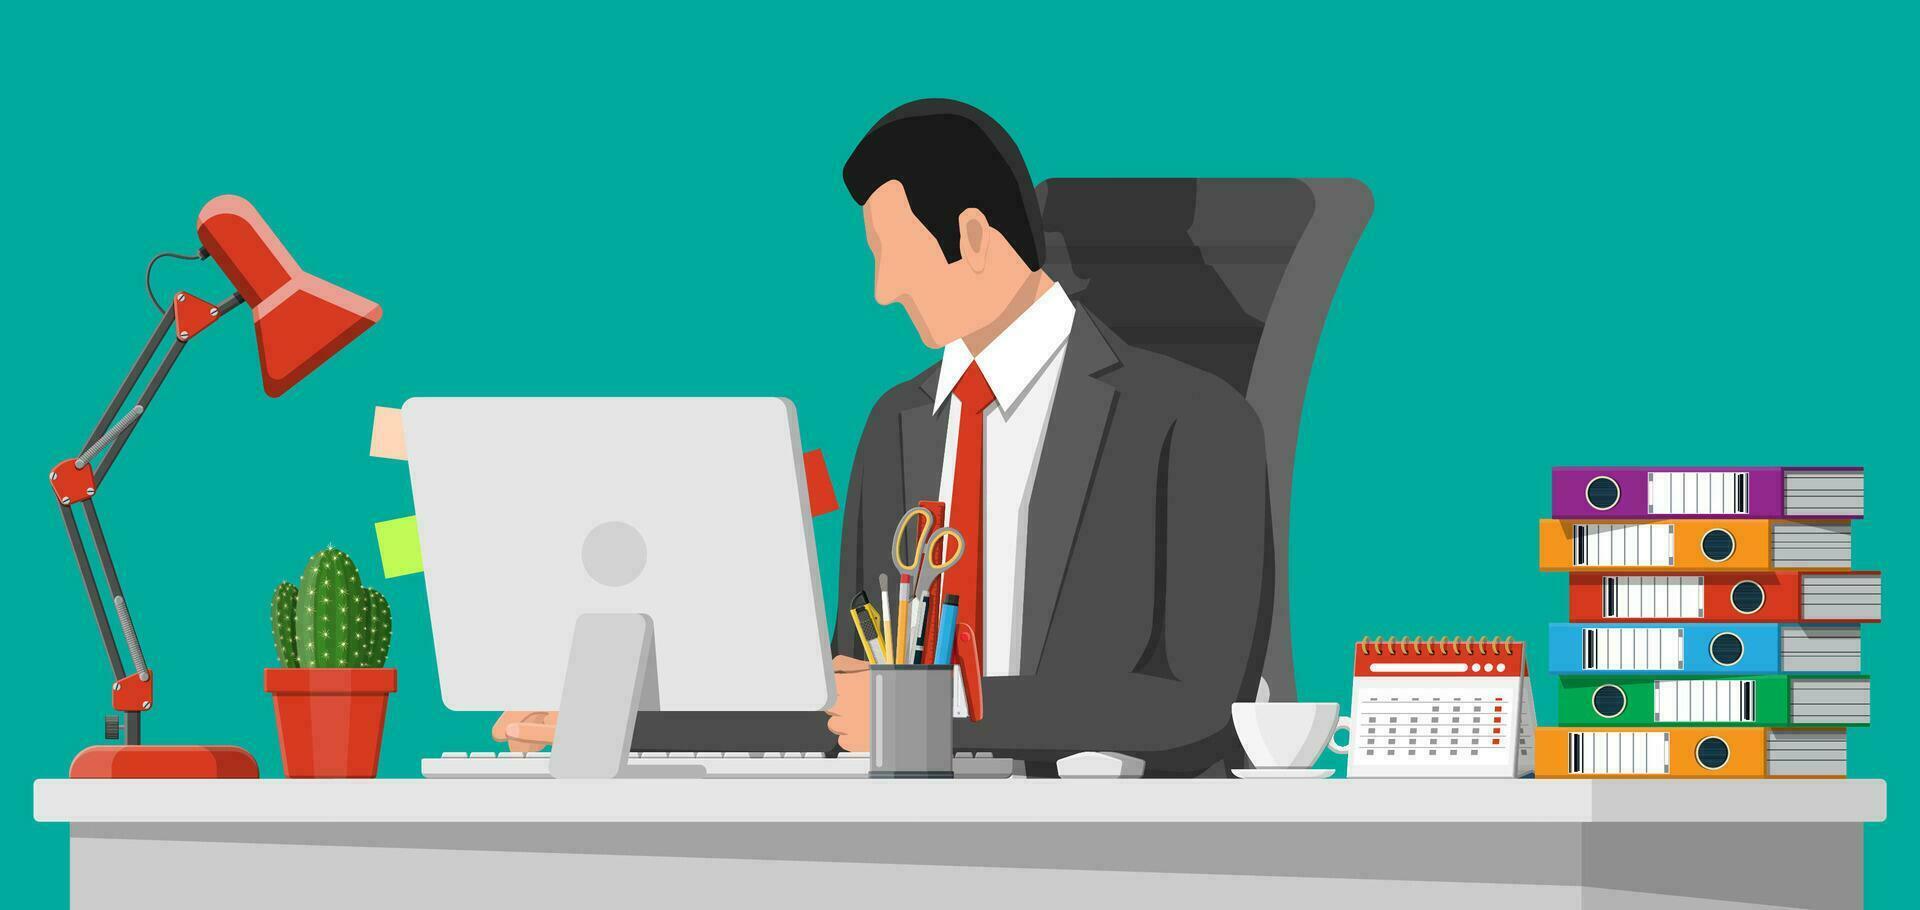 Businessman at work. Office desk with computer chair, lamp, coffee cup, cactus document papers. Calendar, stationery, folders. Modern business workplace. Home workspace table. Flat vector illustration